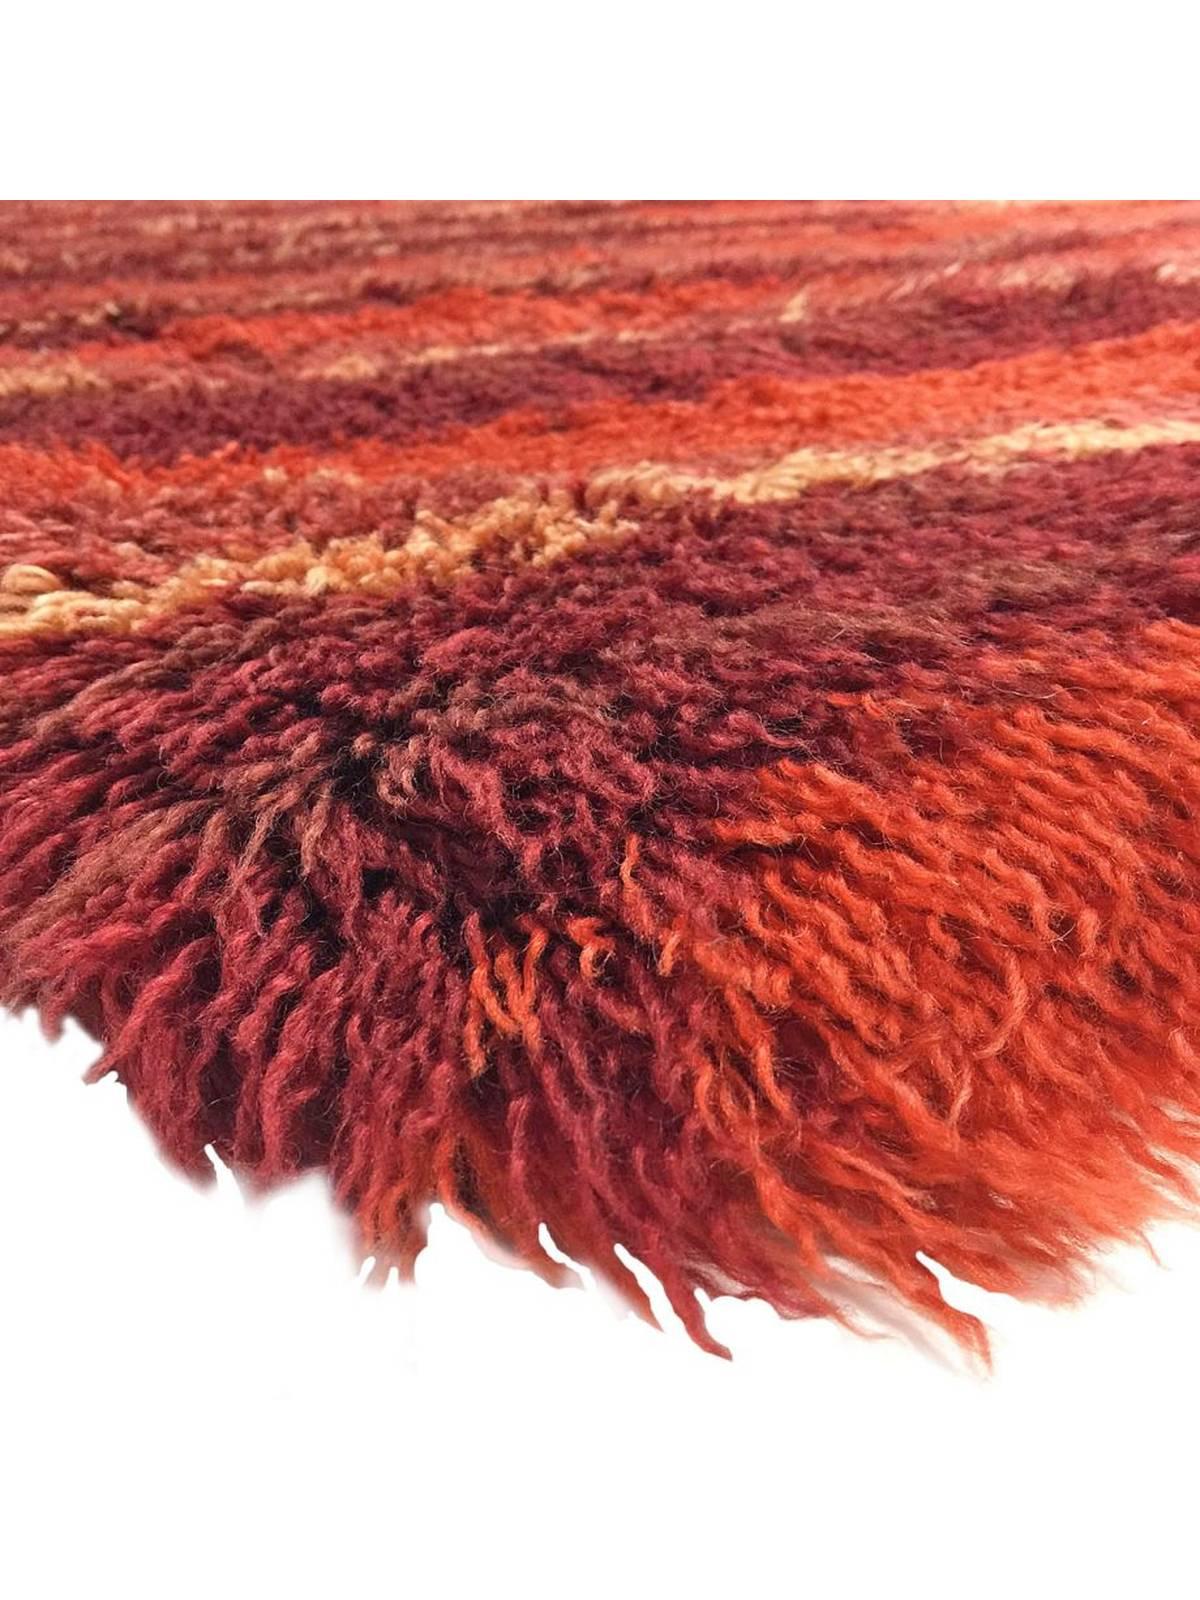 Turkish Red Shag Rug In Excellent Condition For Sale In Vancouver, BC